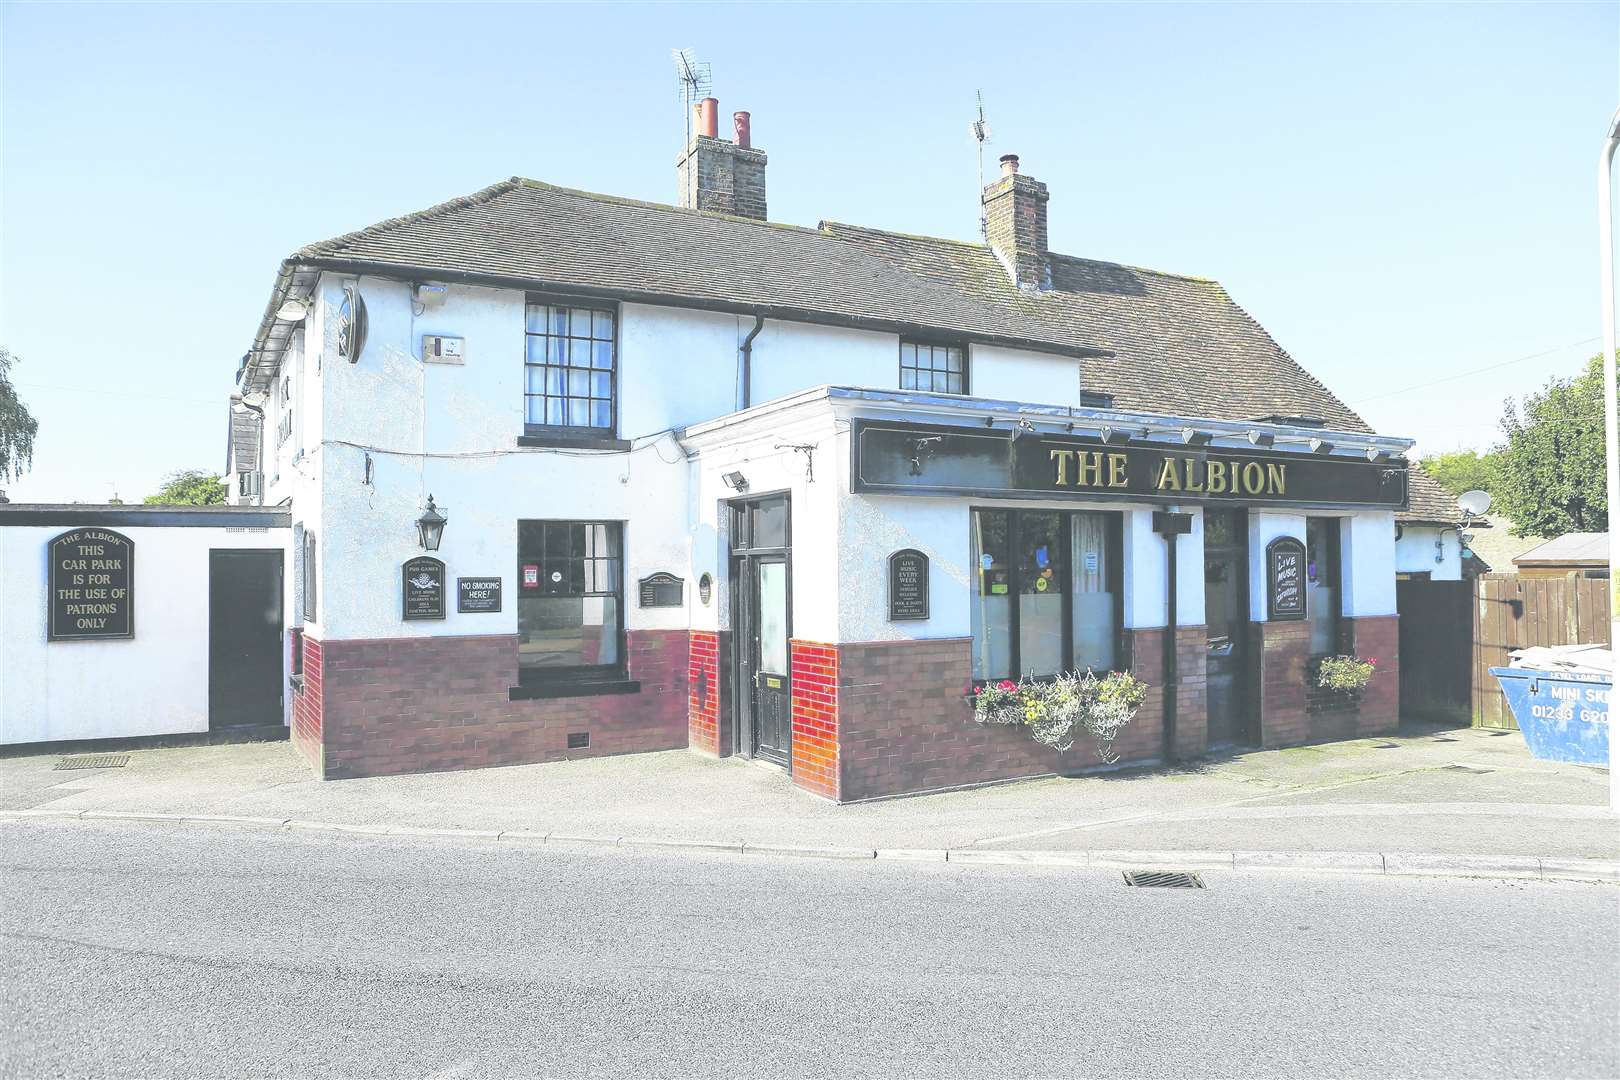 The Albion Pub, where FatBadger's last concert will take place.